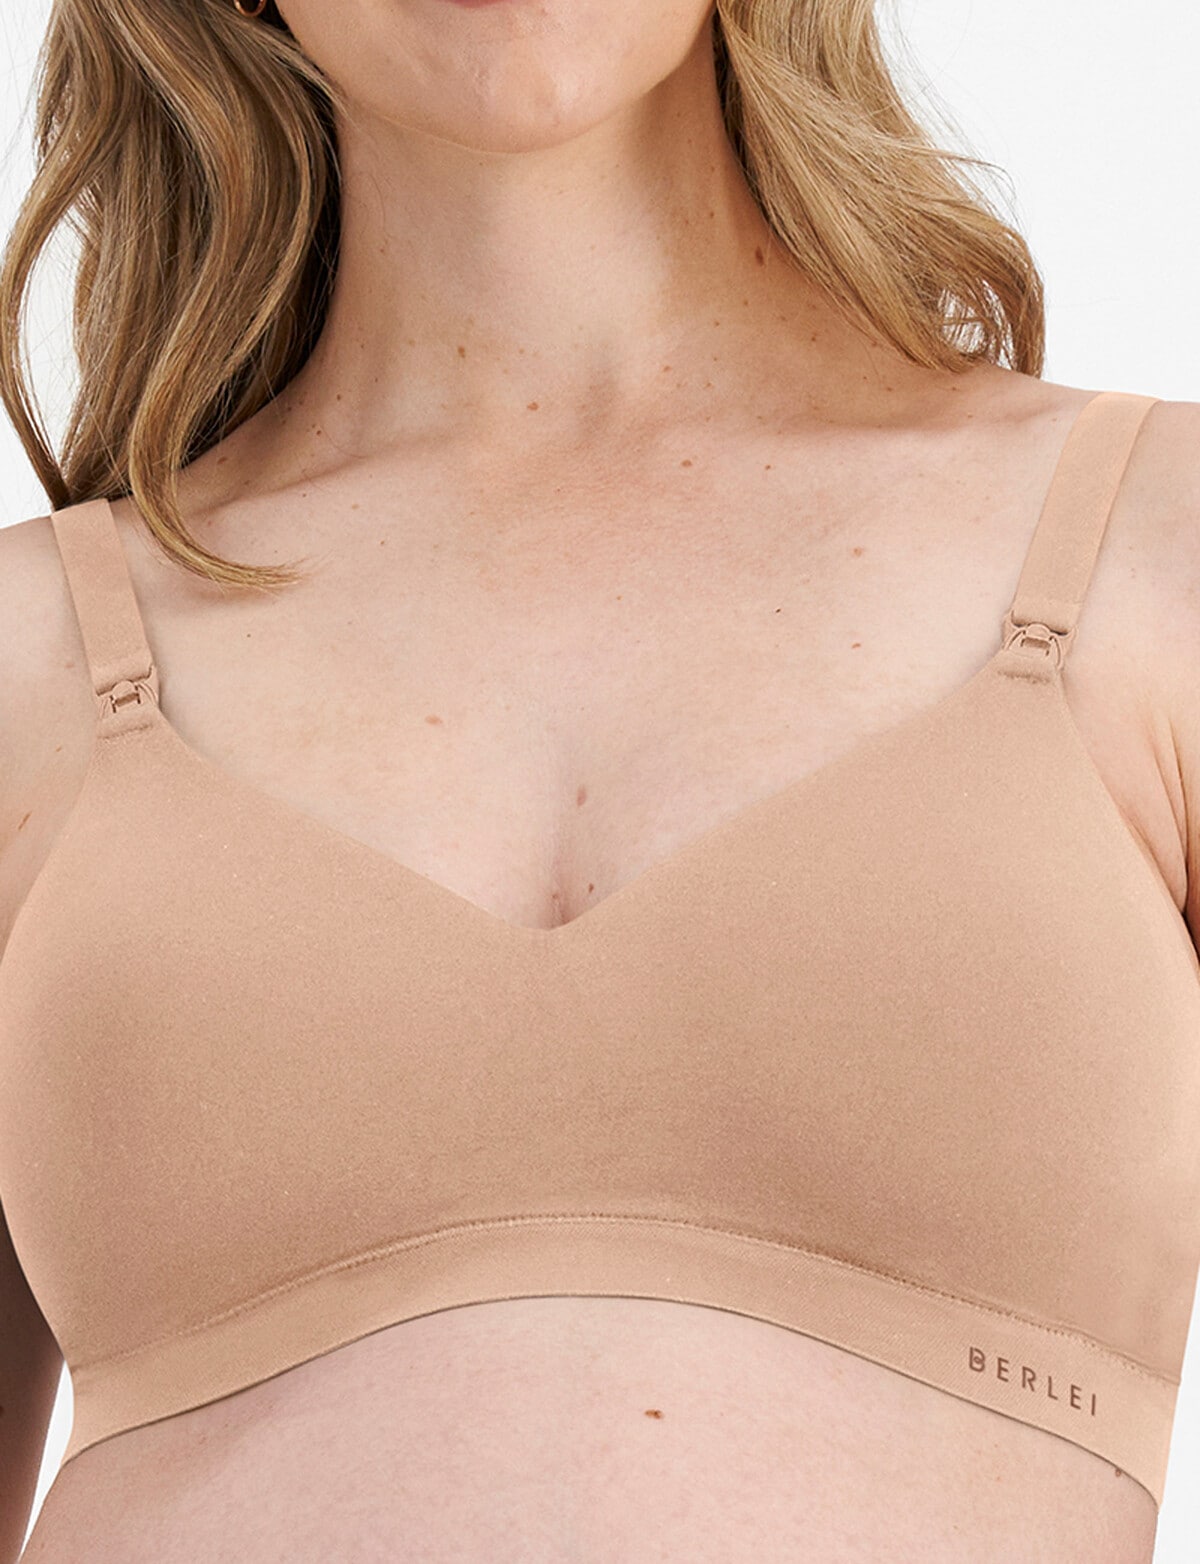 Average Busted Seamless Maternity And Nursing Bra (a-d Cup Sizes) - Nude, L